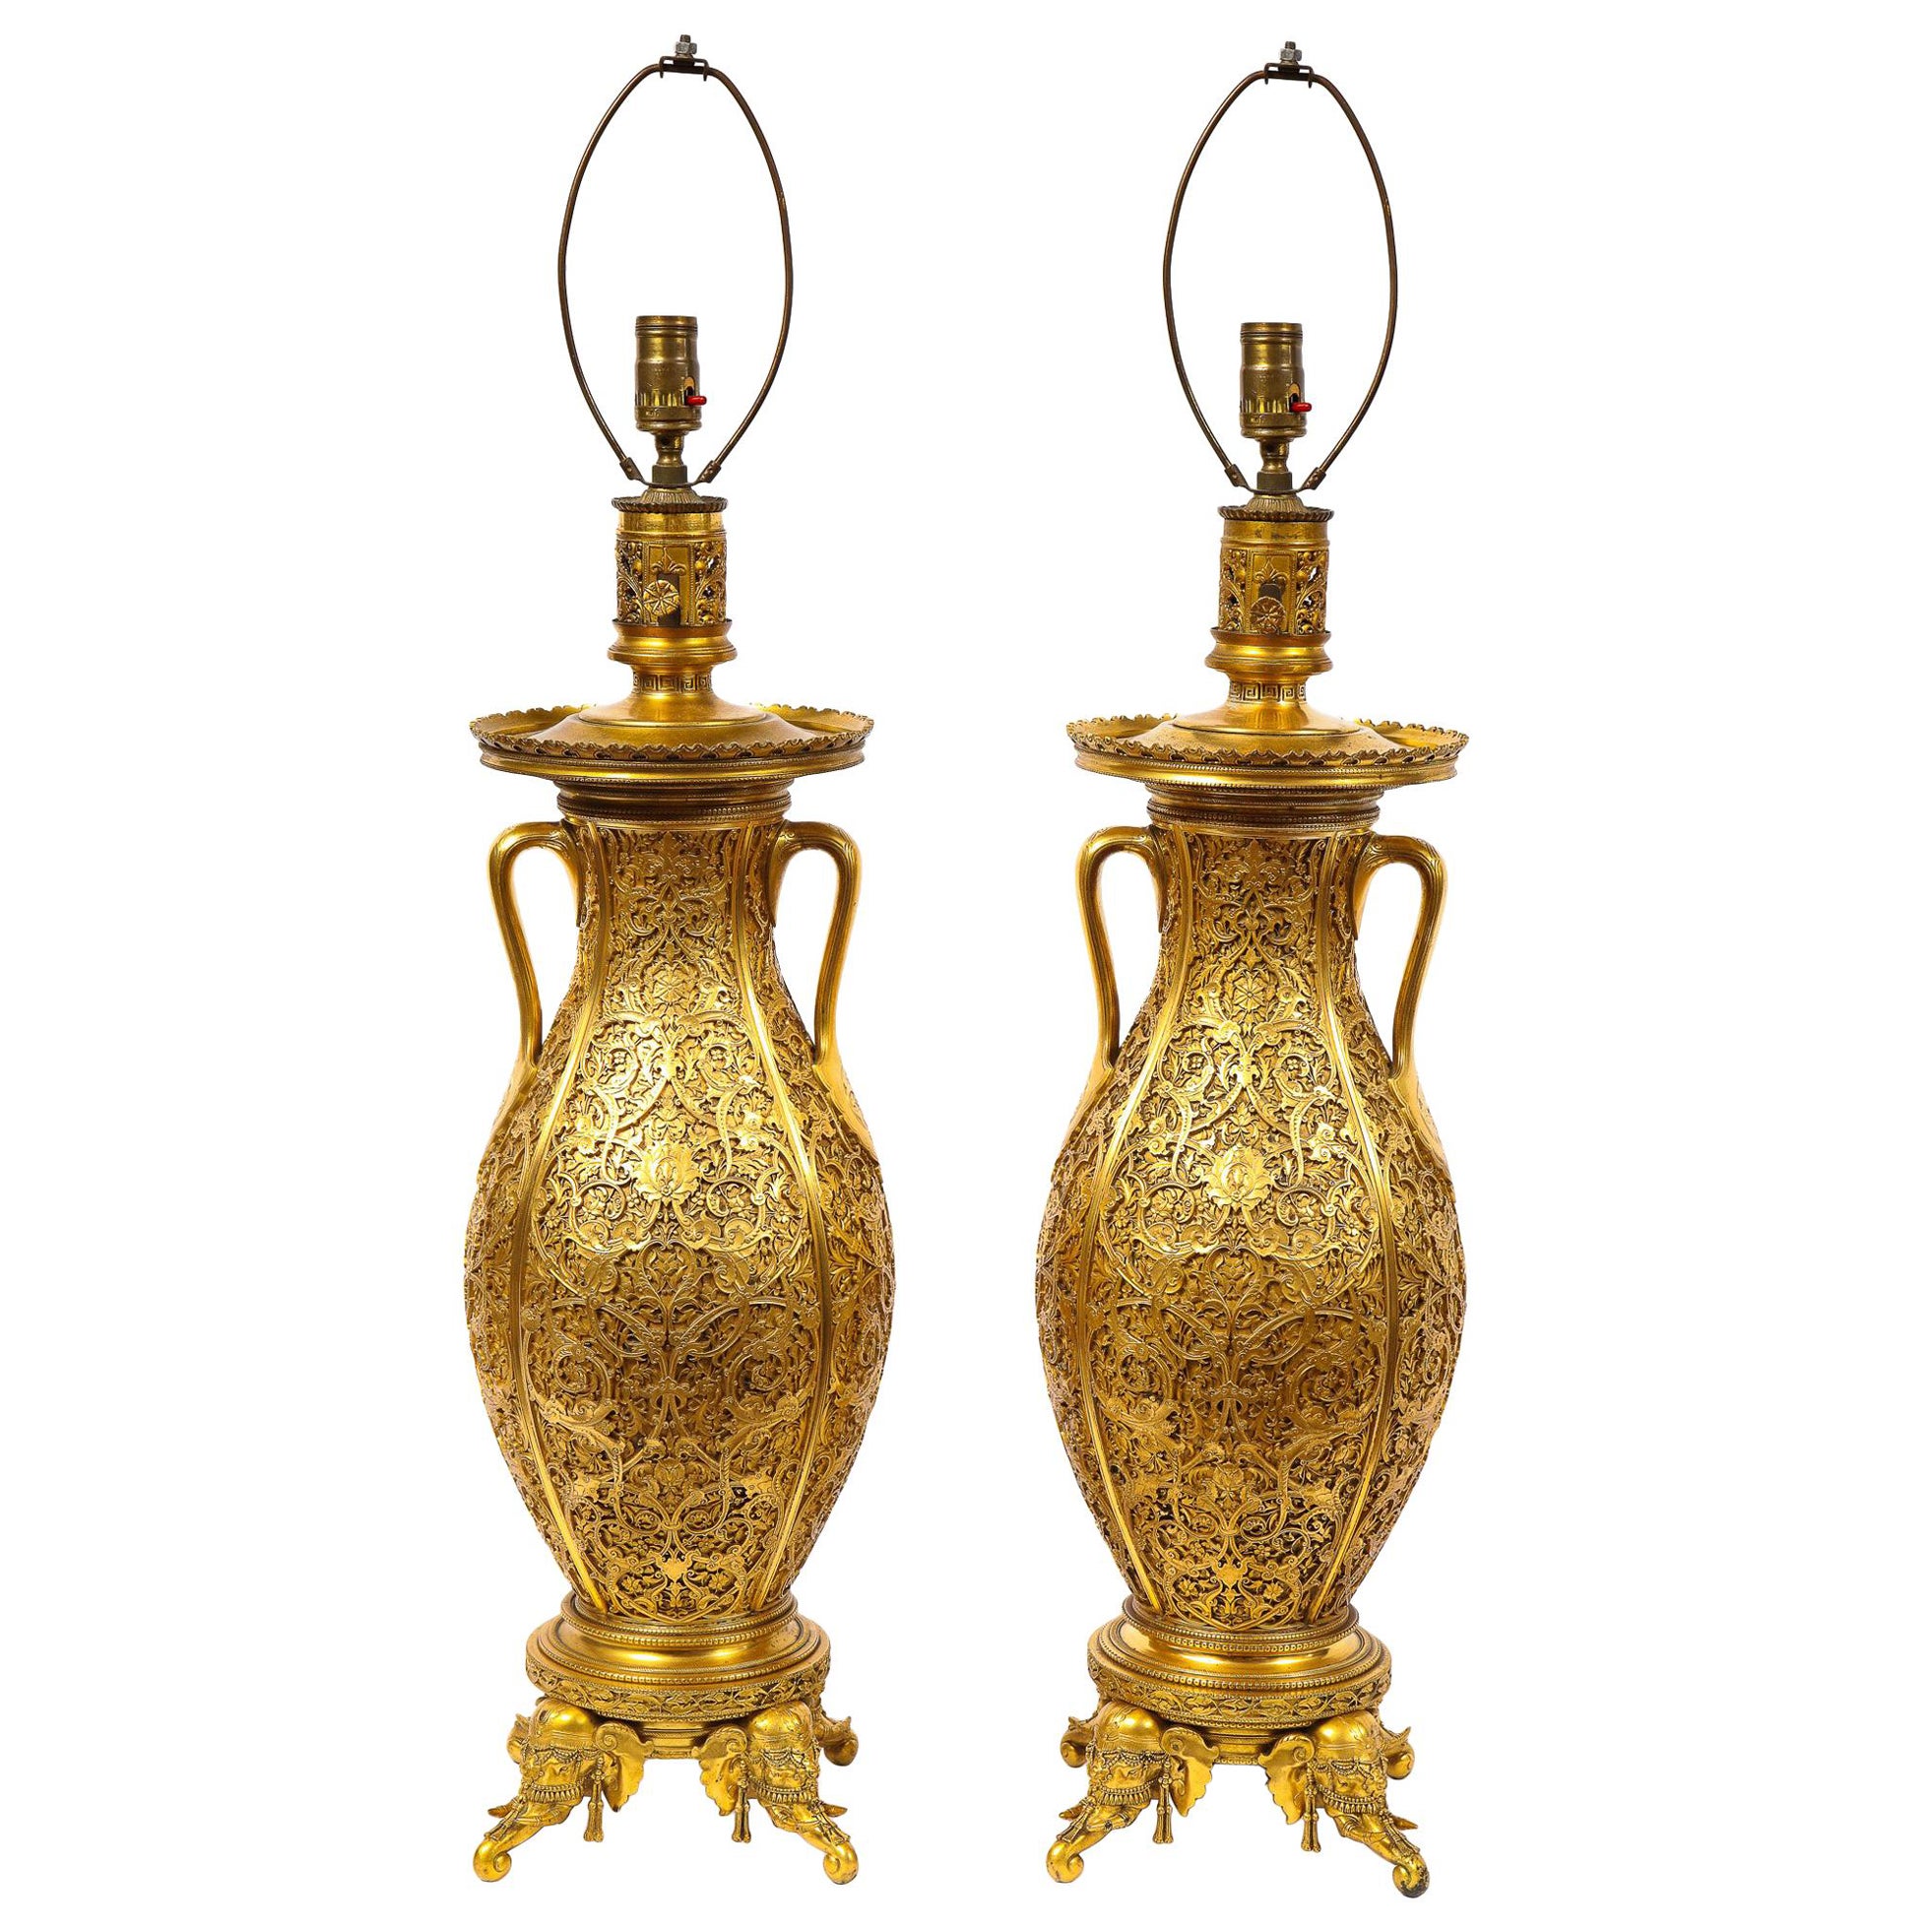 Pair of French Japonisme Ormolu Vases E. Lièvre, Executed by F. Barbedienne